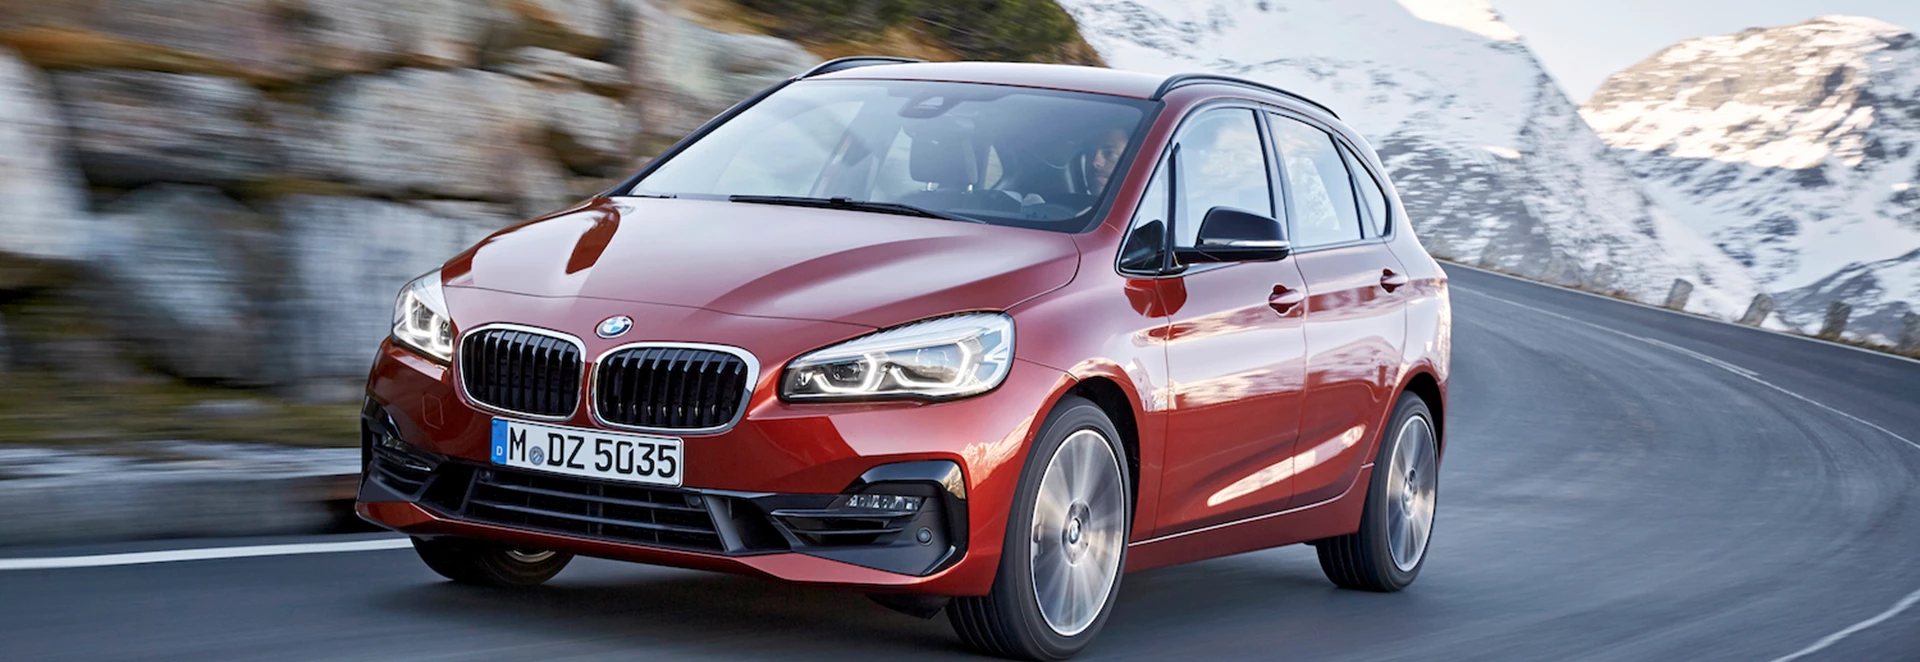 Why the BMW 2 Series Active Tourer is the 5 star car for Uber drivers